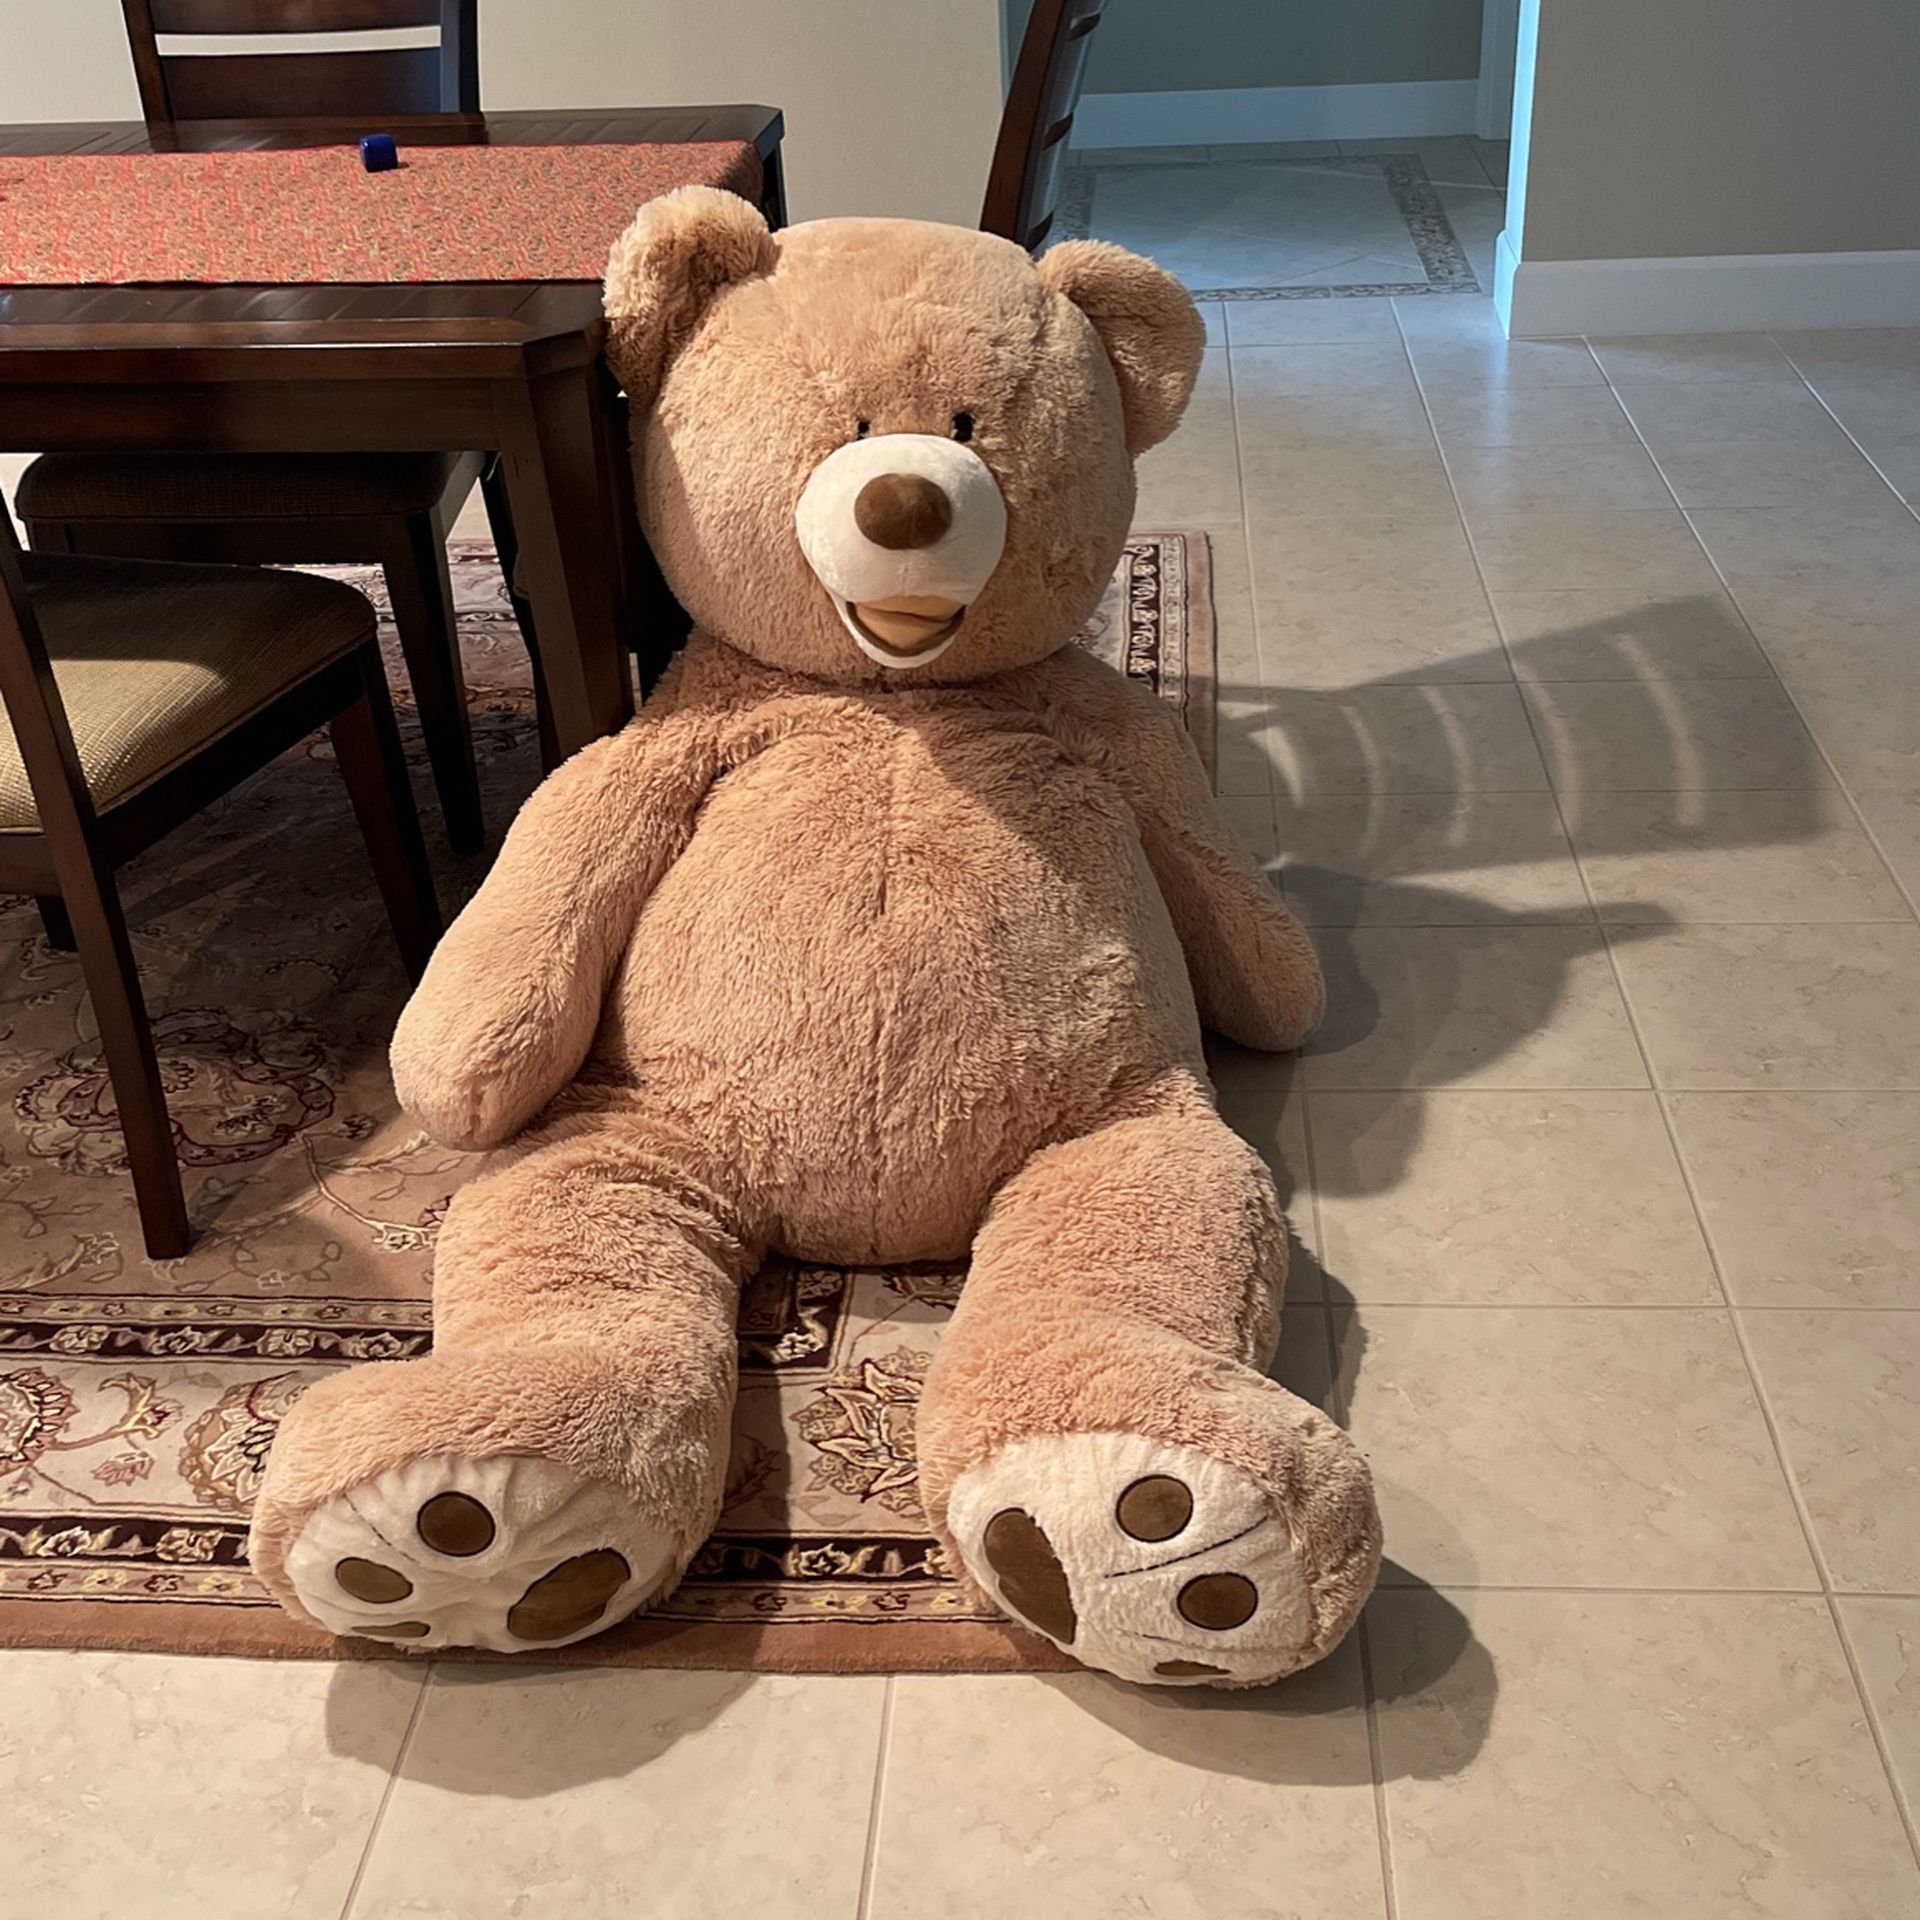 Huge Teddy Bear Bought From Costco